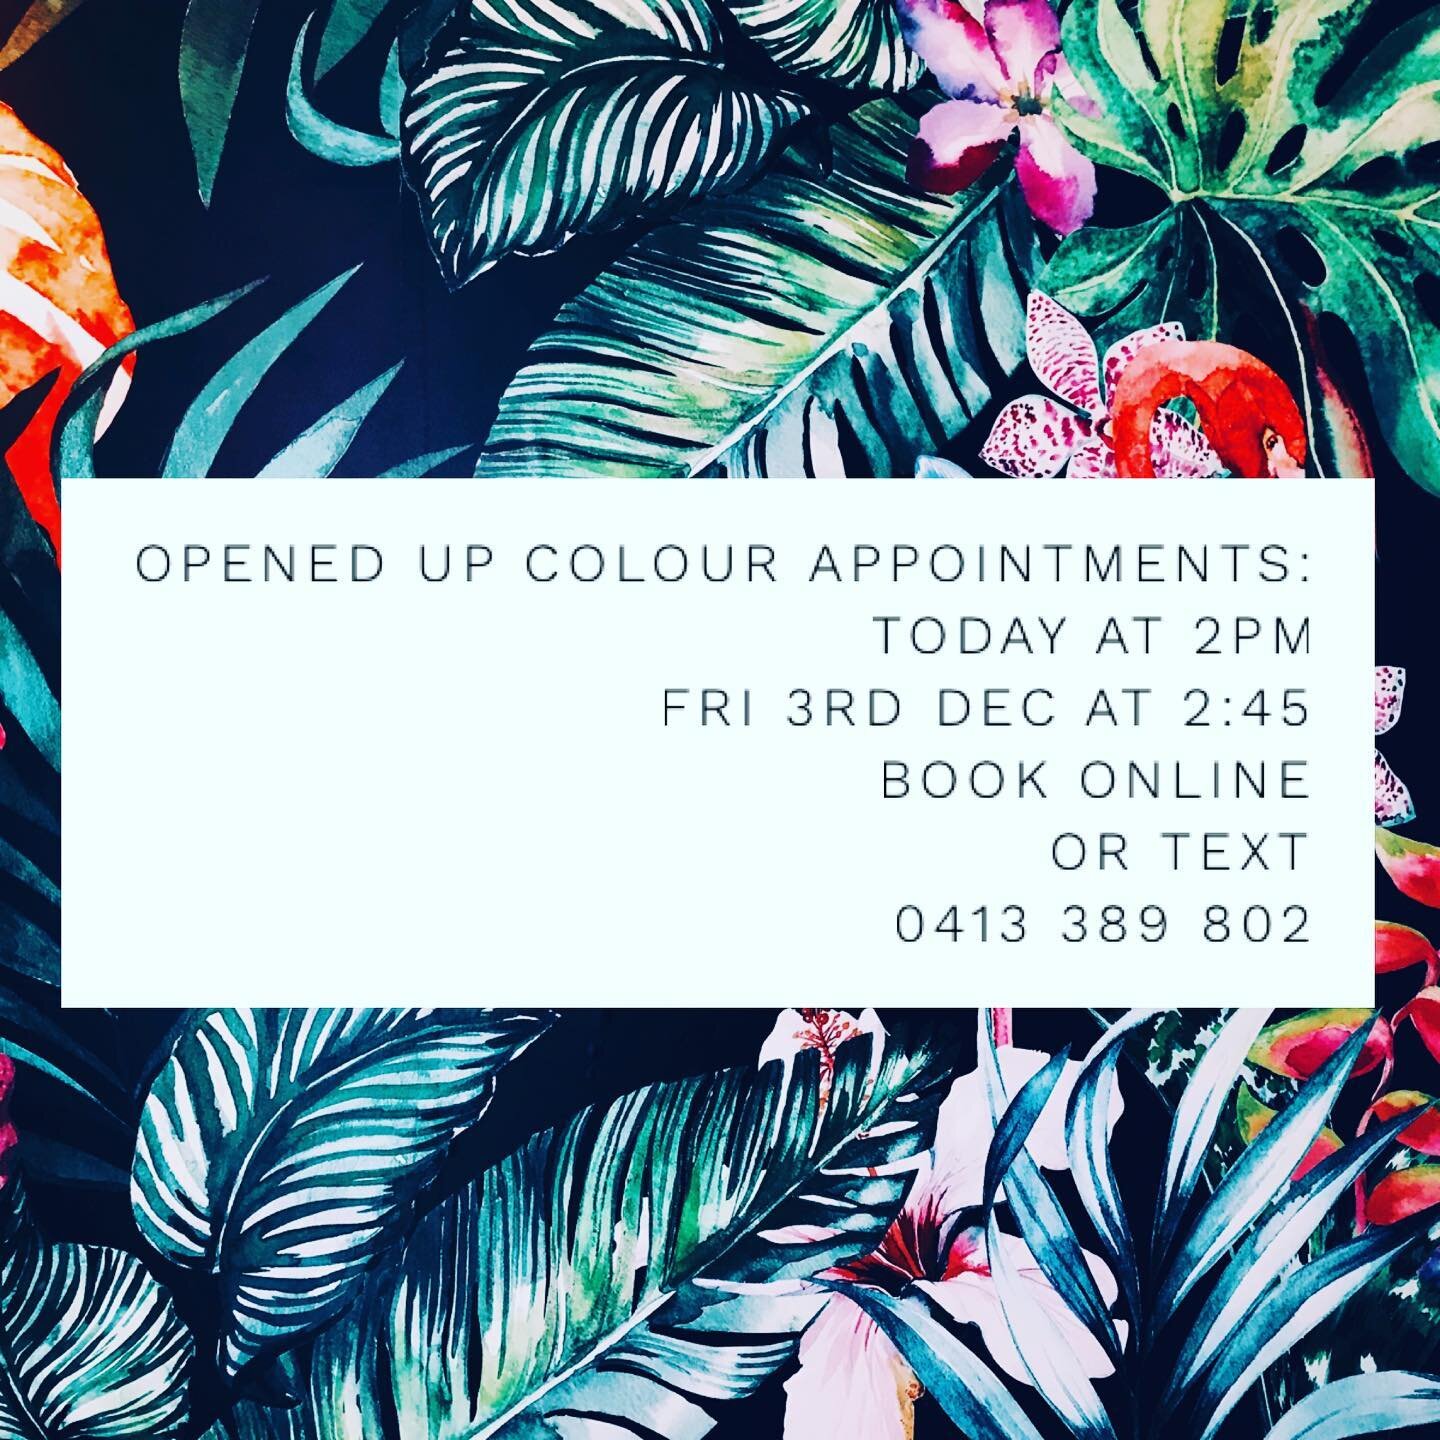 We&rsquo;ve had 2 spots open up so get in quick if you want a booking. #hairdressermagic #lastminute #getinquick #blondespecialistmelbourne